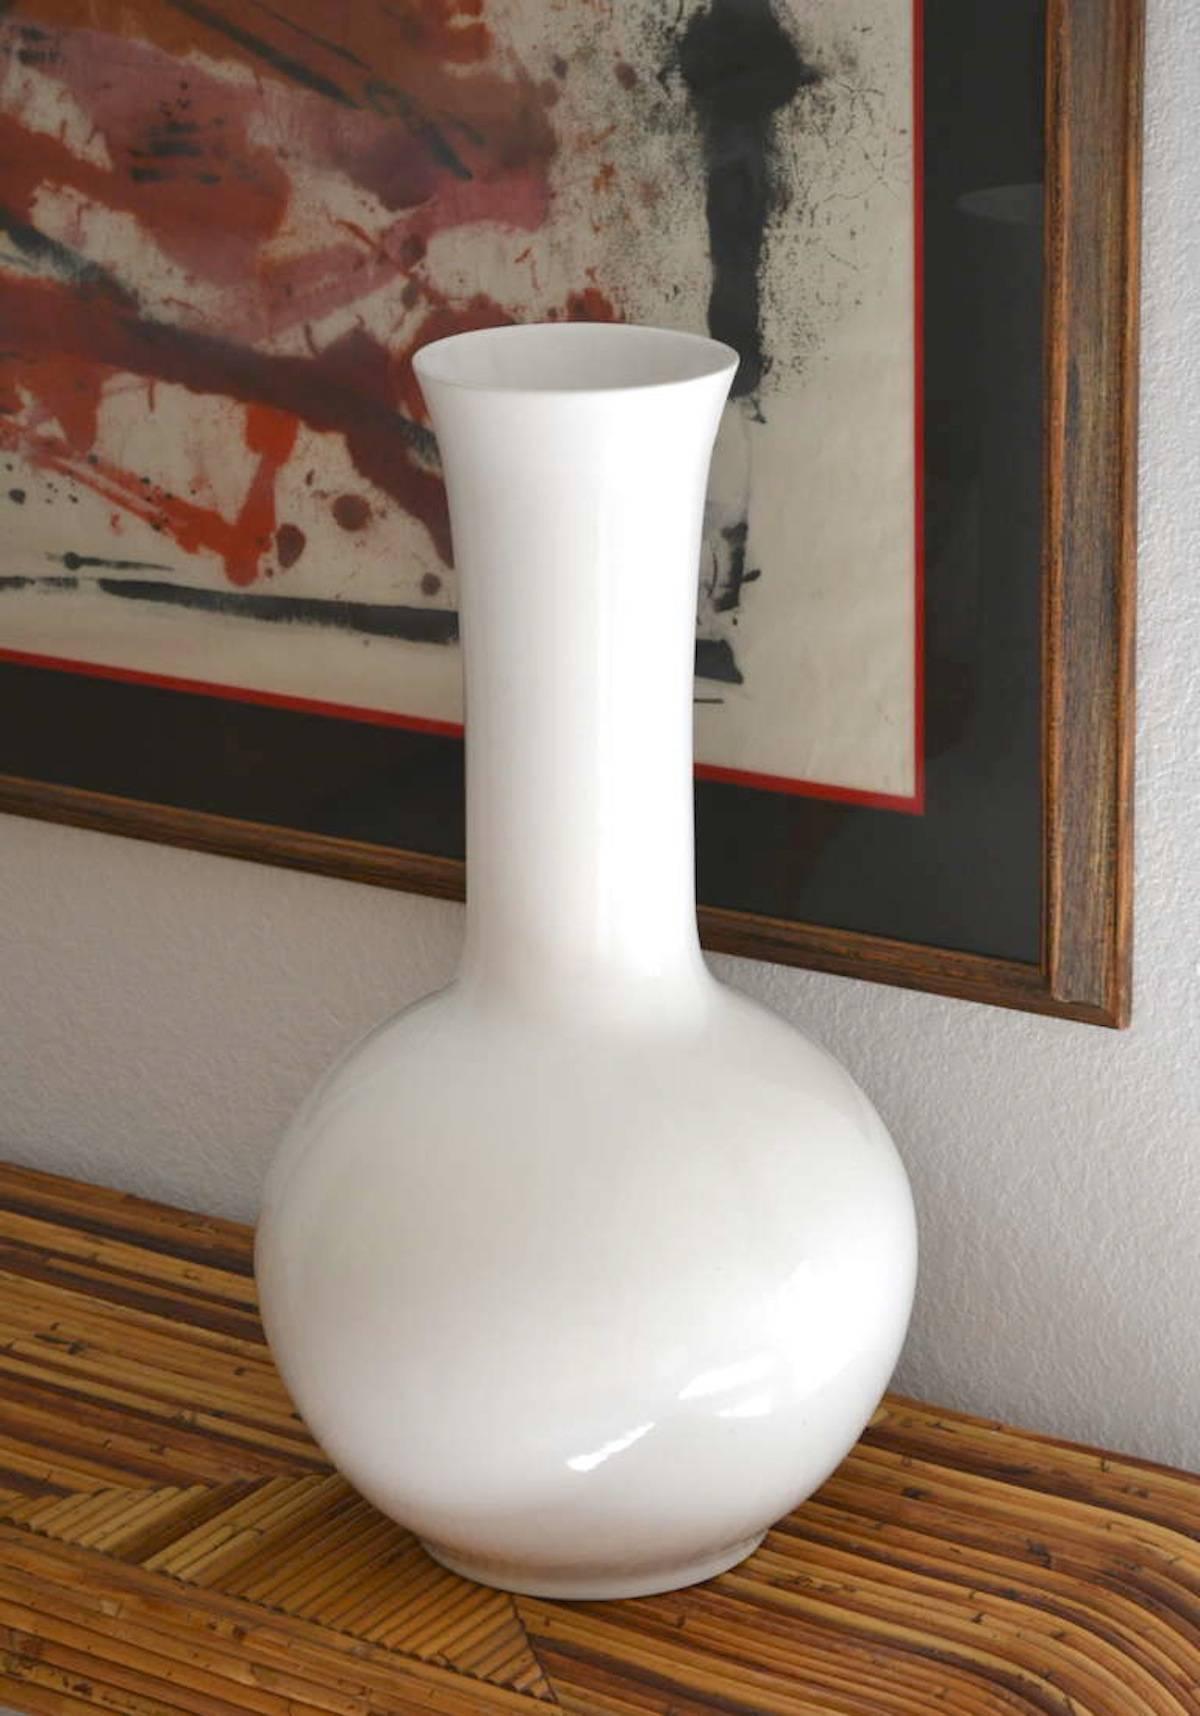 Stunning midcentury hand-turned Blanc de Chine long neck ceramic vase, circa 1950s-1960s. This white glazed vase is sculptural in form and highly decorative.